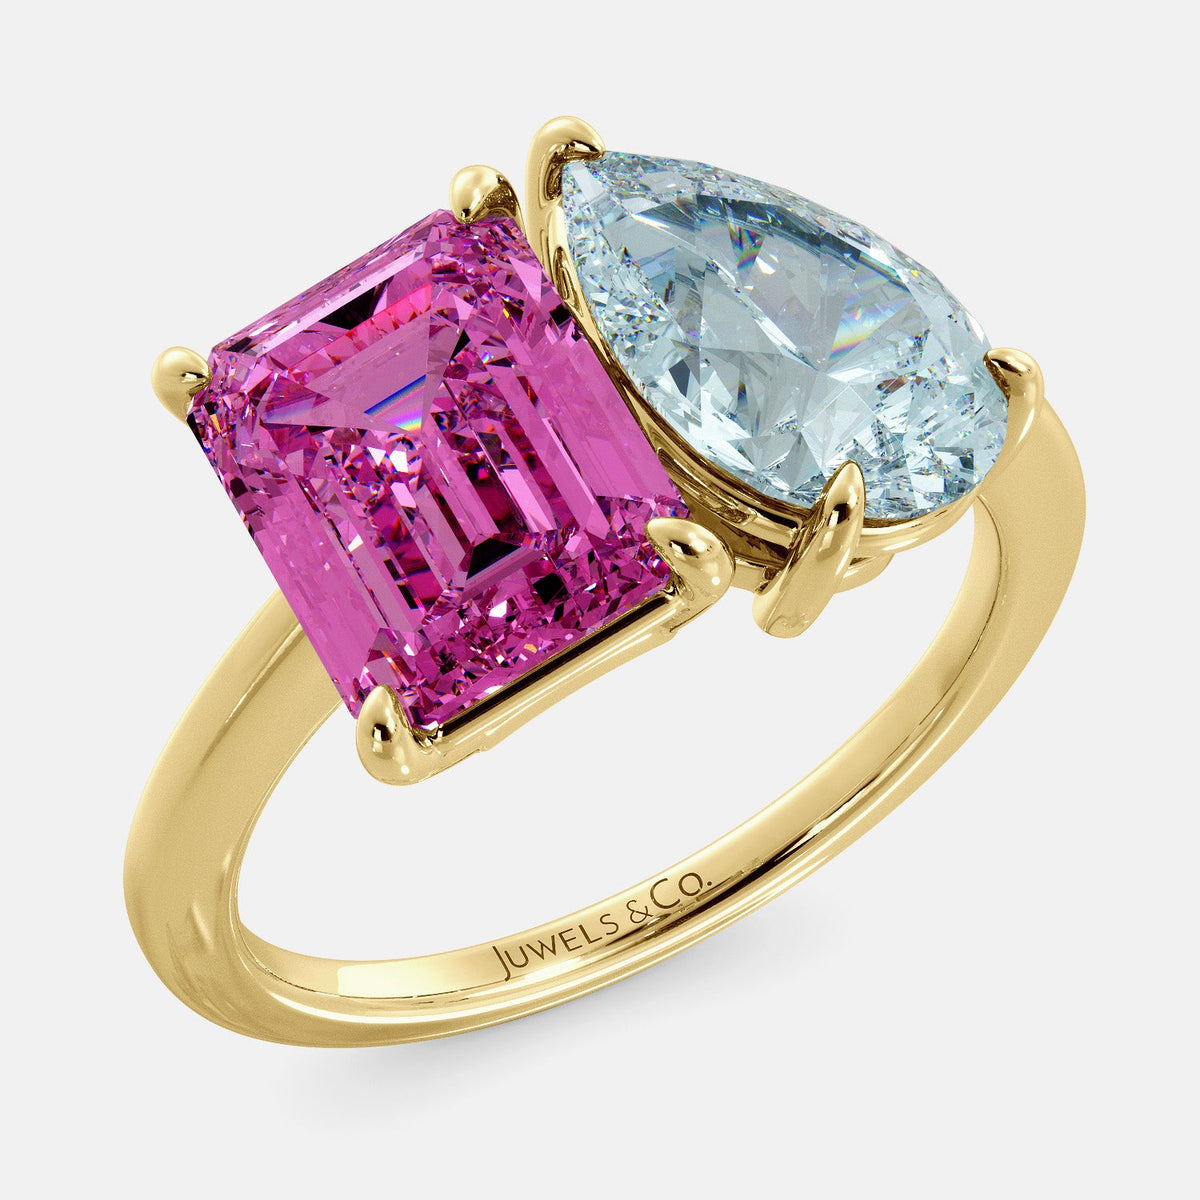 A toi et moi ring with an emerald-cut Pink Sapphire and pear-cut gemstone. The emerald-cut morganite is set on the left of the ring, and the pear-cut gemstone is set on the right. The ring is made of recycled yellow gold and has a simple, elegant design. The pear-cut gemstone can be customized. **Here are some additional details about the image:** * The emerald-cut white Pink Sapphire is a birthstone for October. * The pear-cut gemstone can be customized to any stone of your choice.